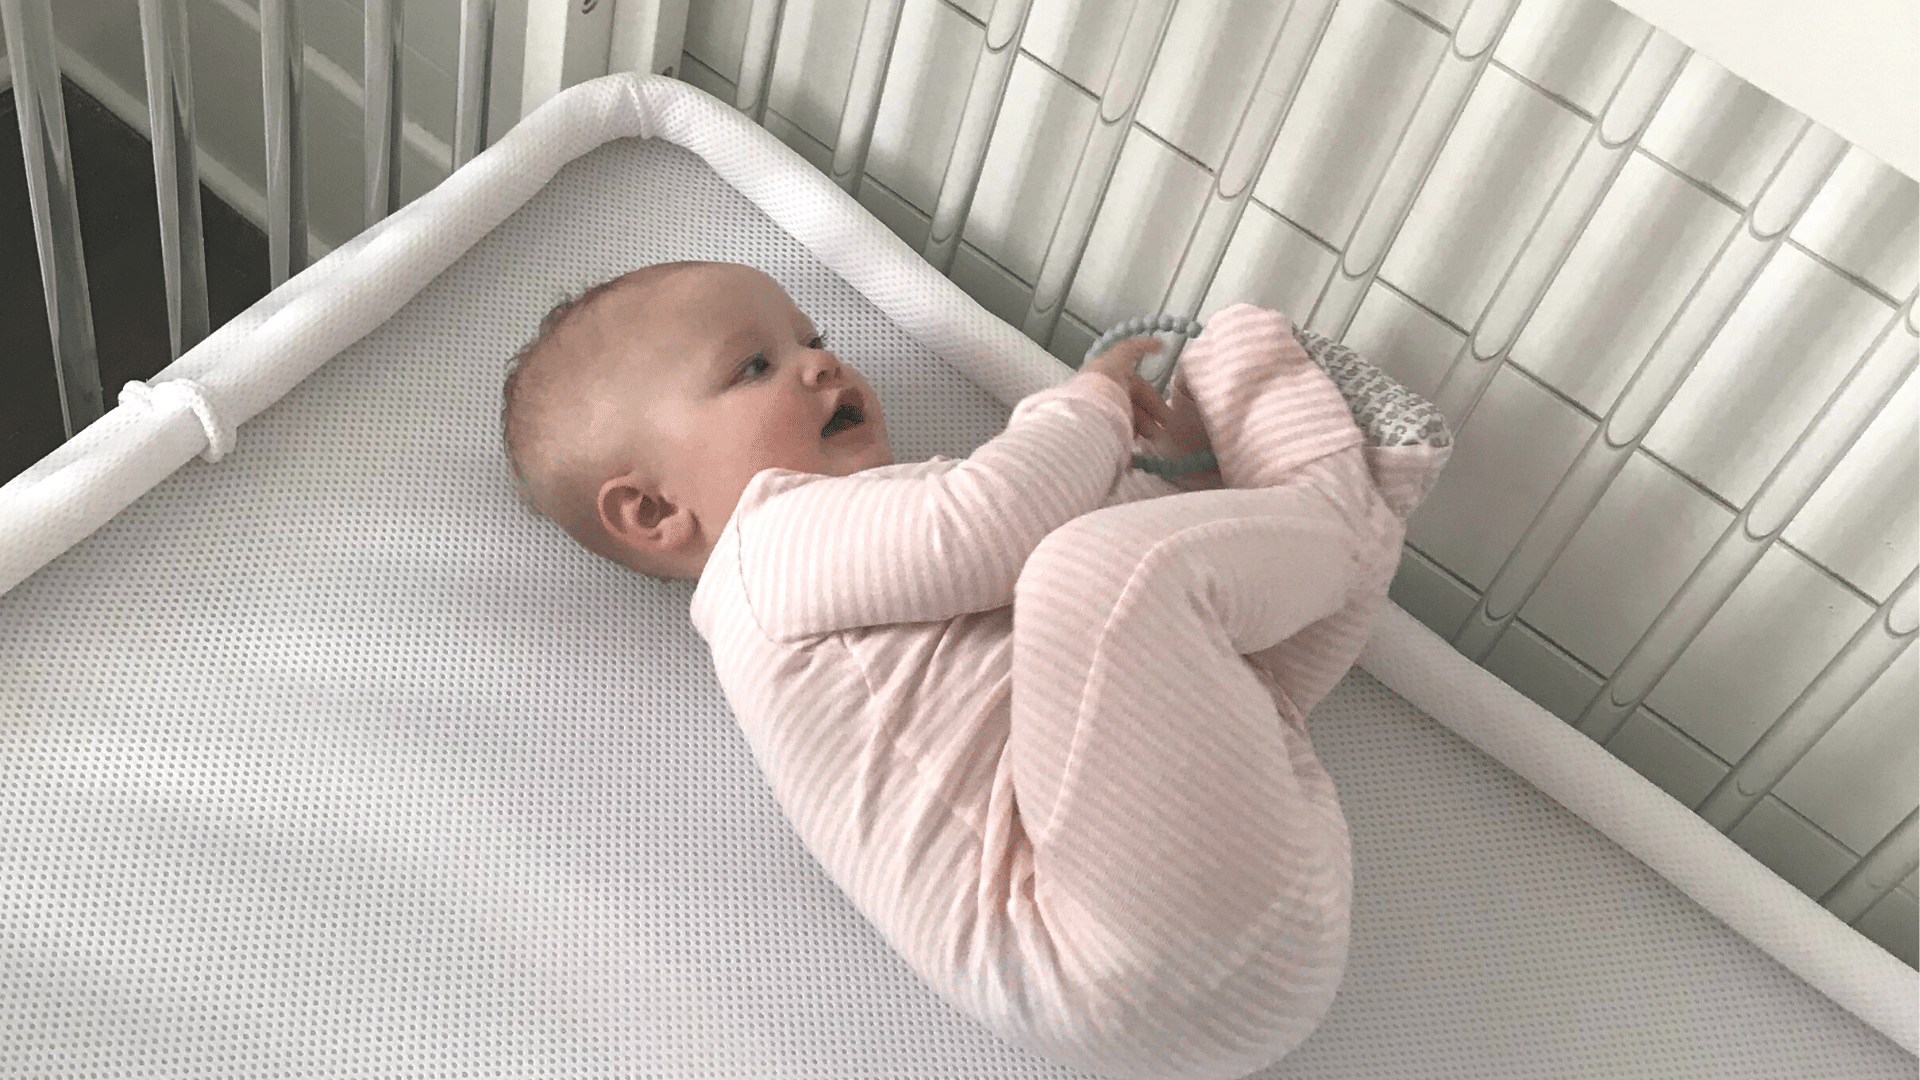 When Do Babies Start to Roll Over?